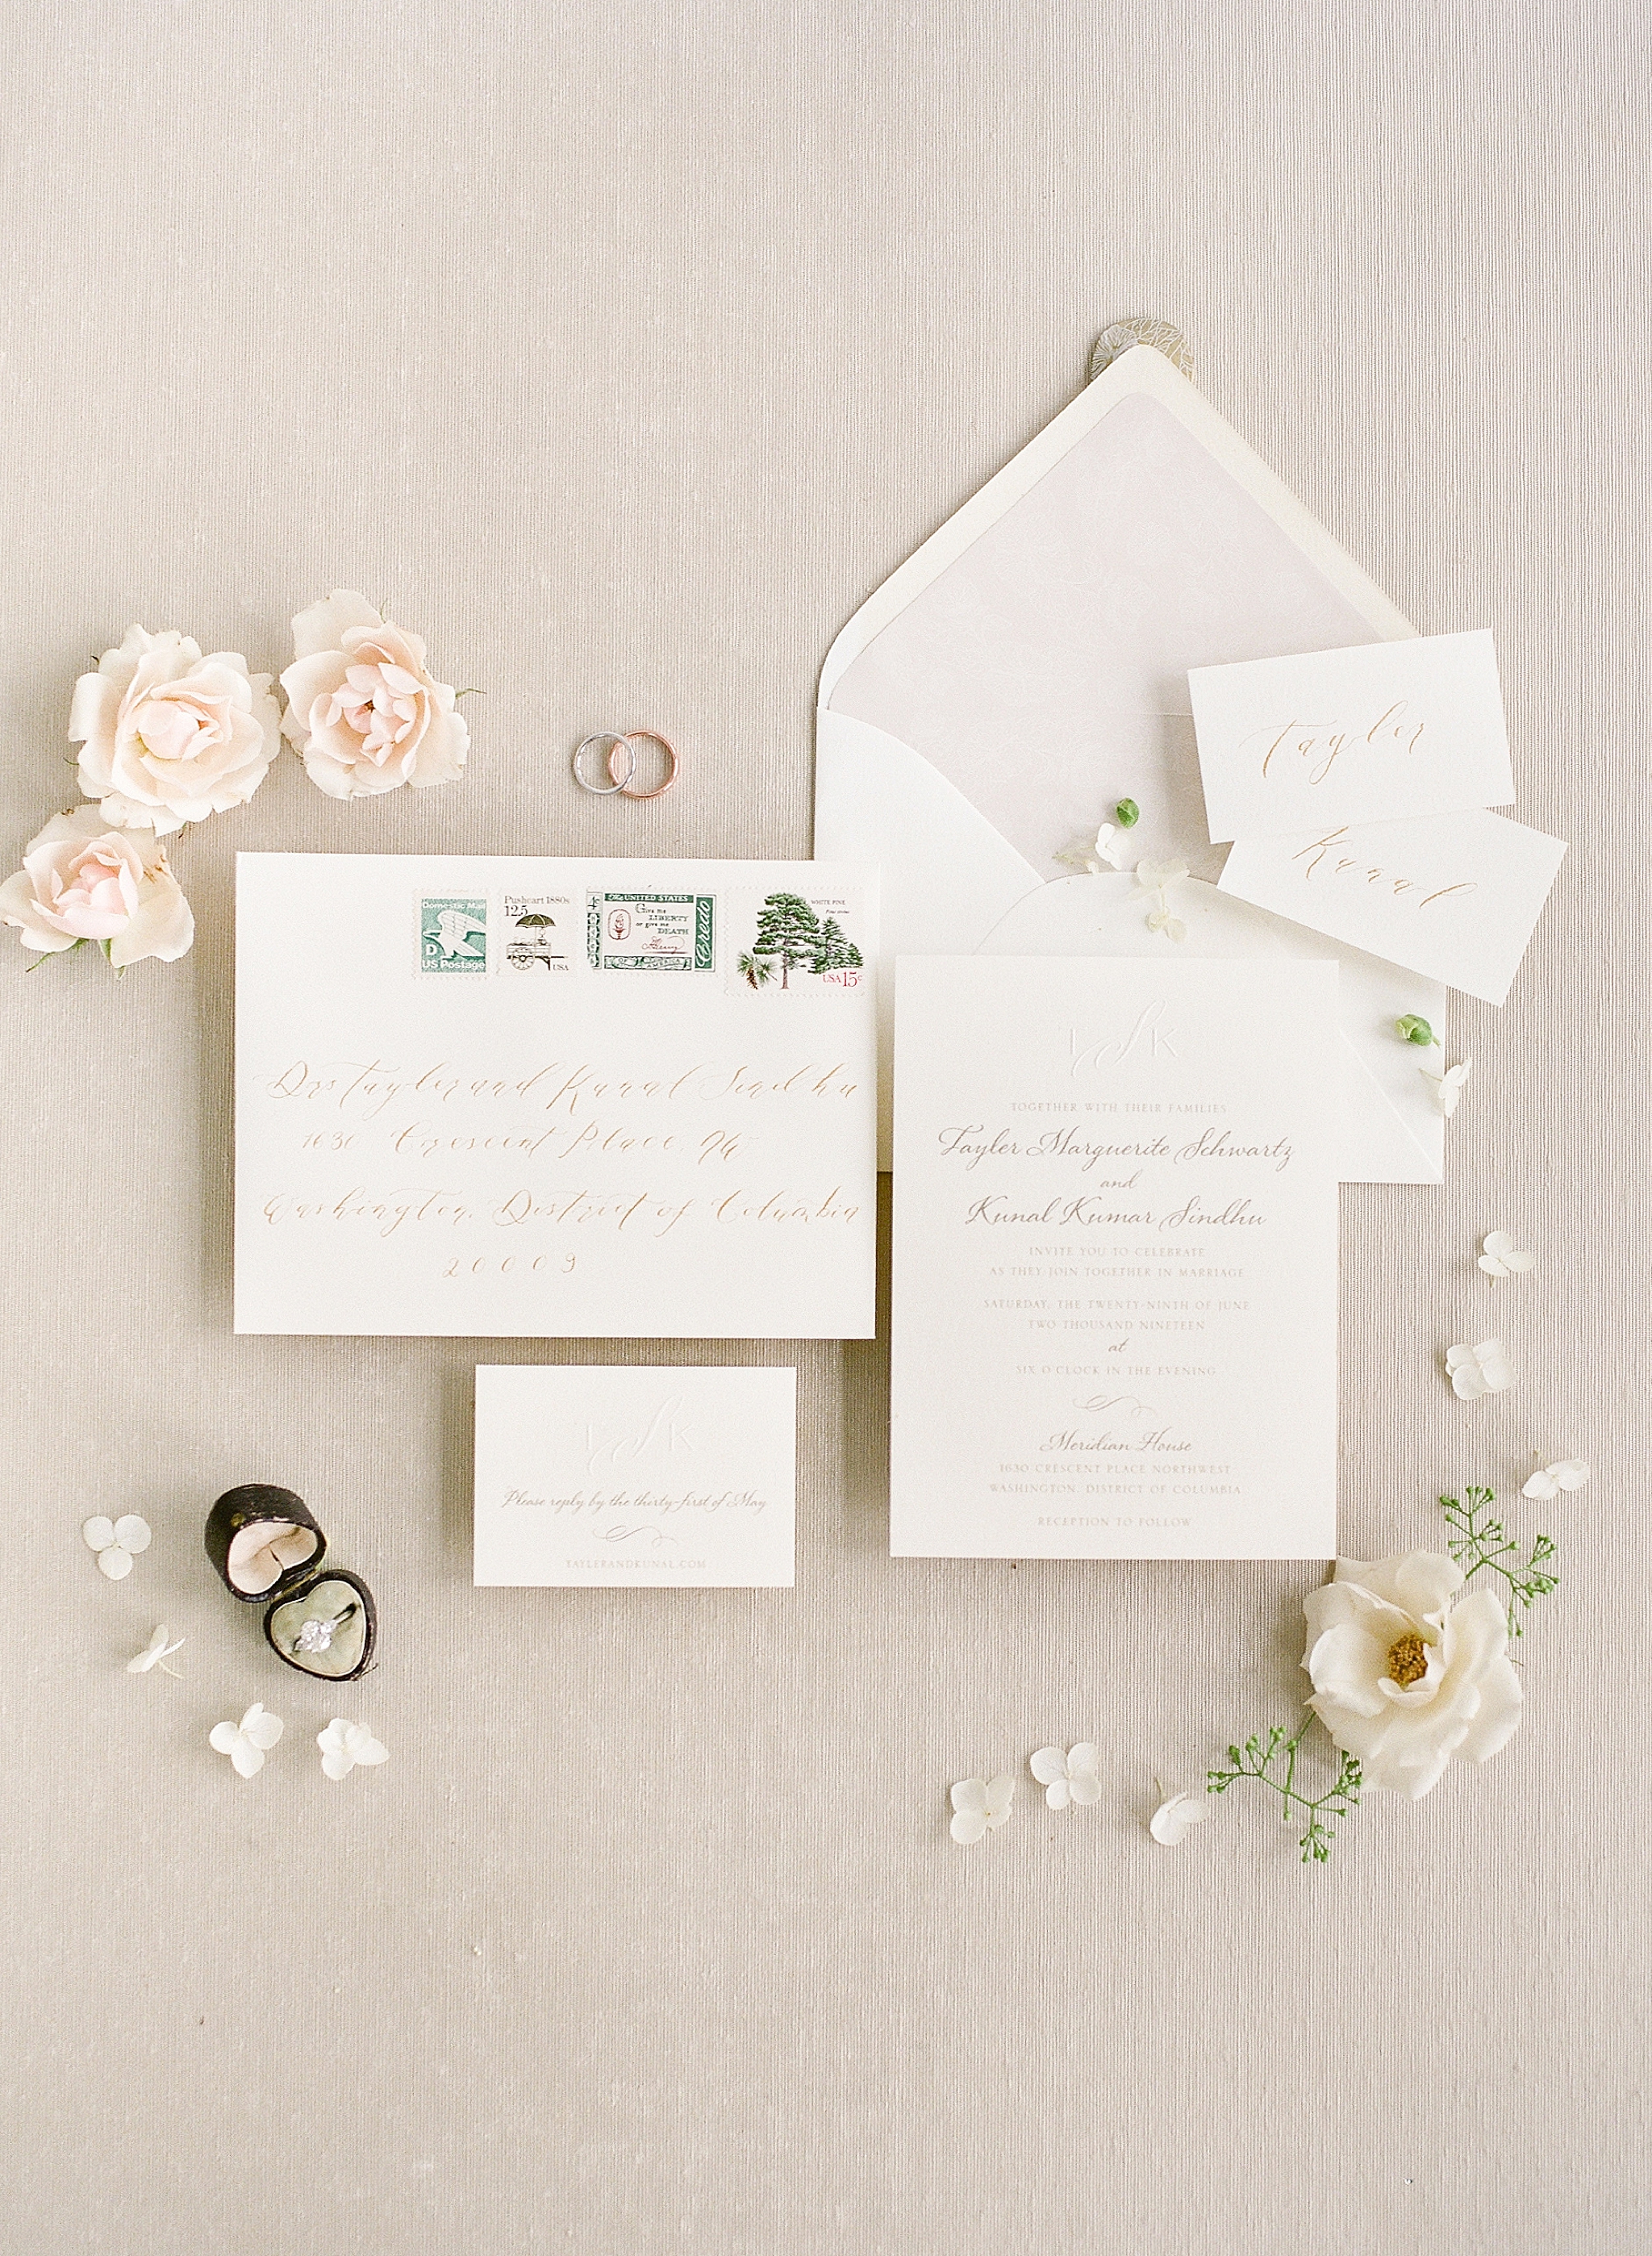 Neutral invitation suite for a black tie wedding at the Meridian House in Washington, DC.